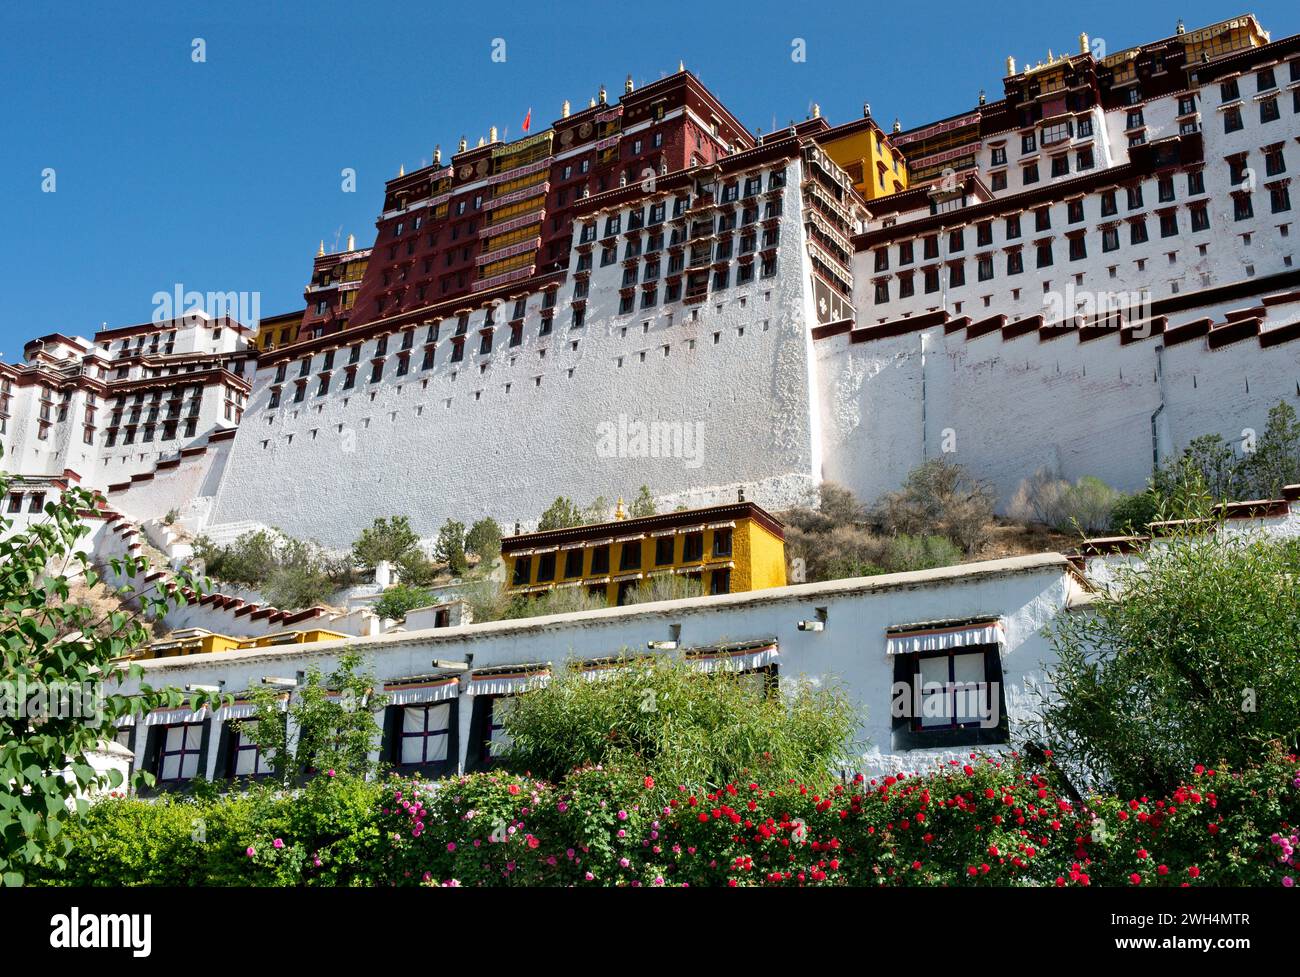 Once home to the Dalai Lama, Potala Palace was designated a UNESCO World Heritage Site in 1994 and is a popular tourist attraction in Lhasa. Stock Photo